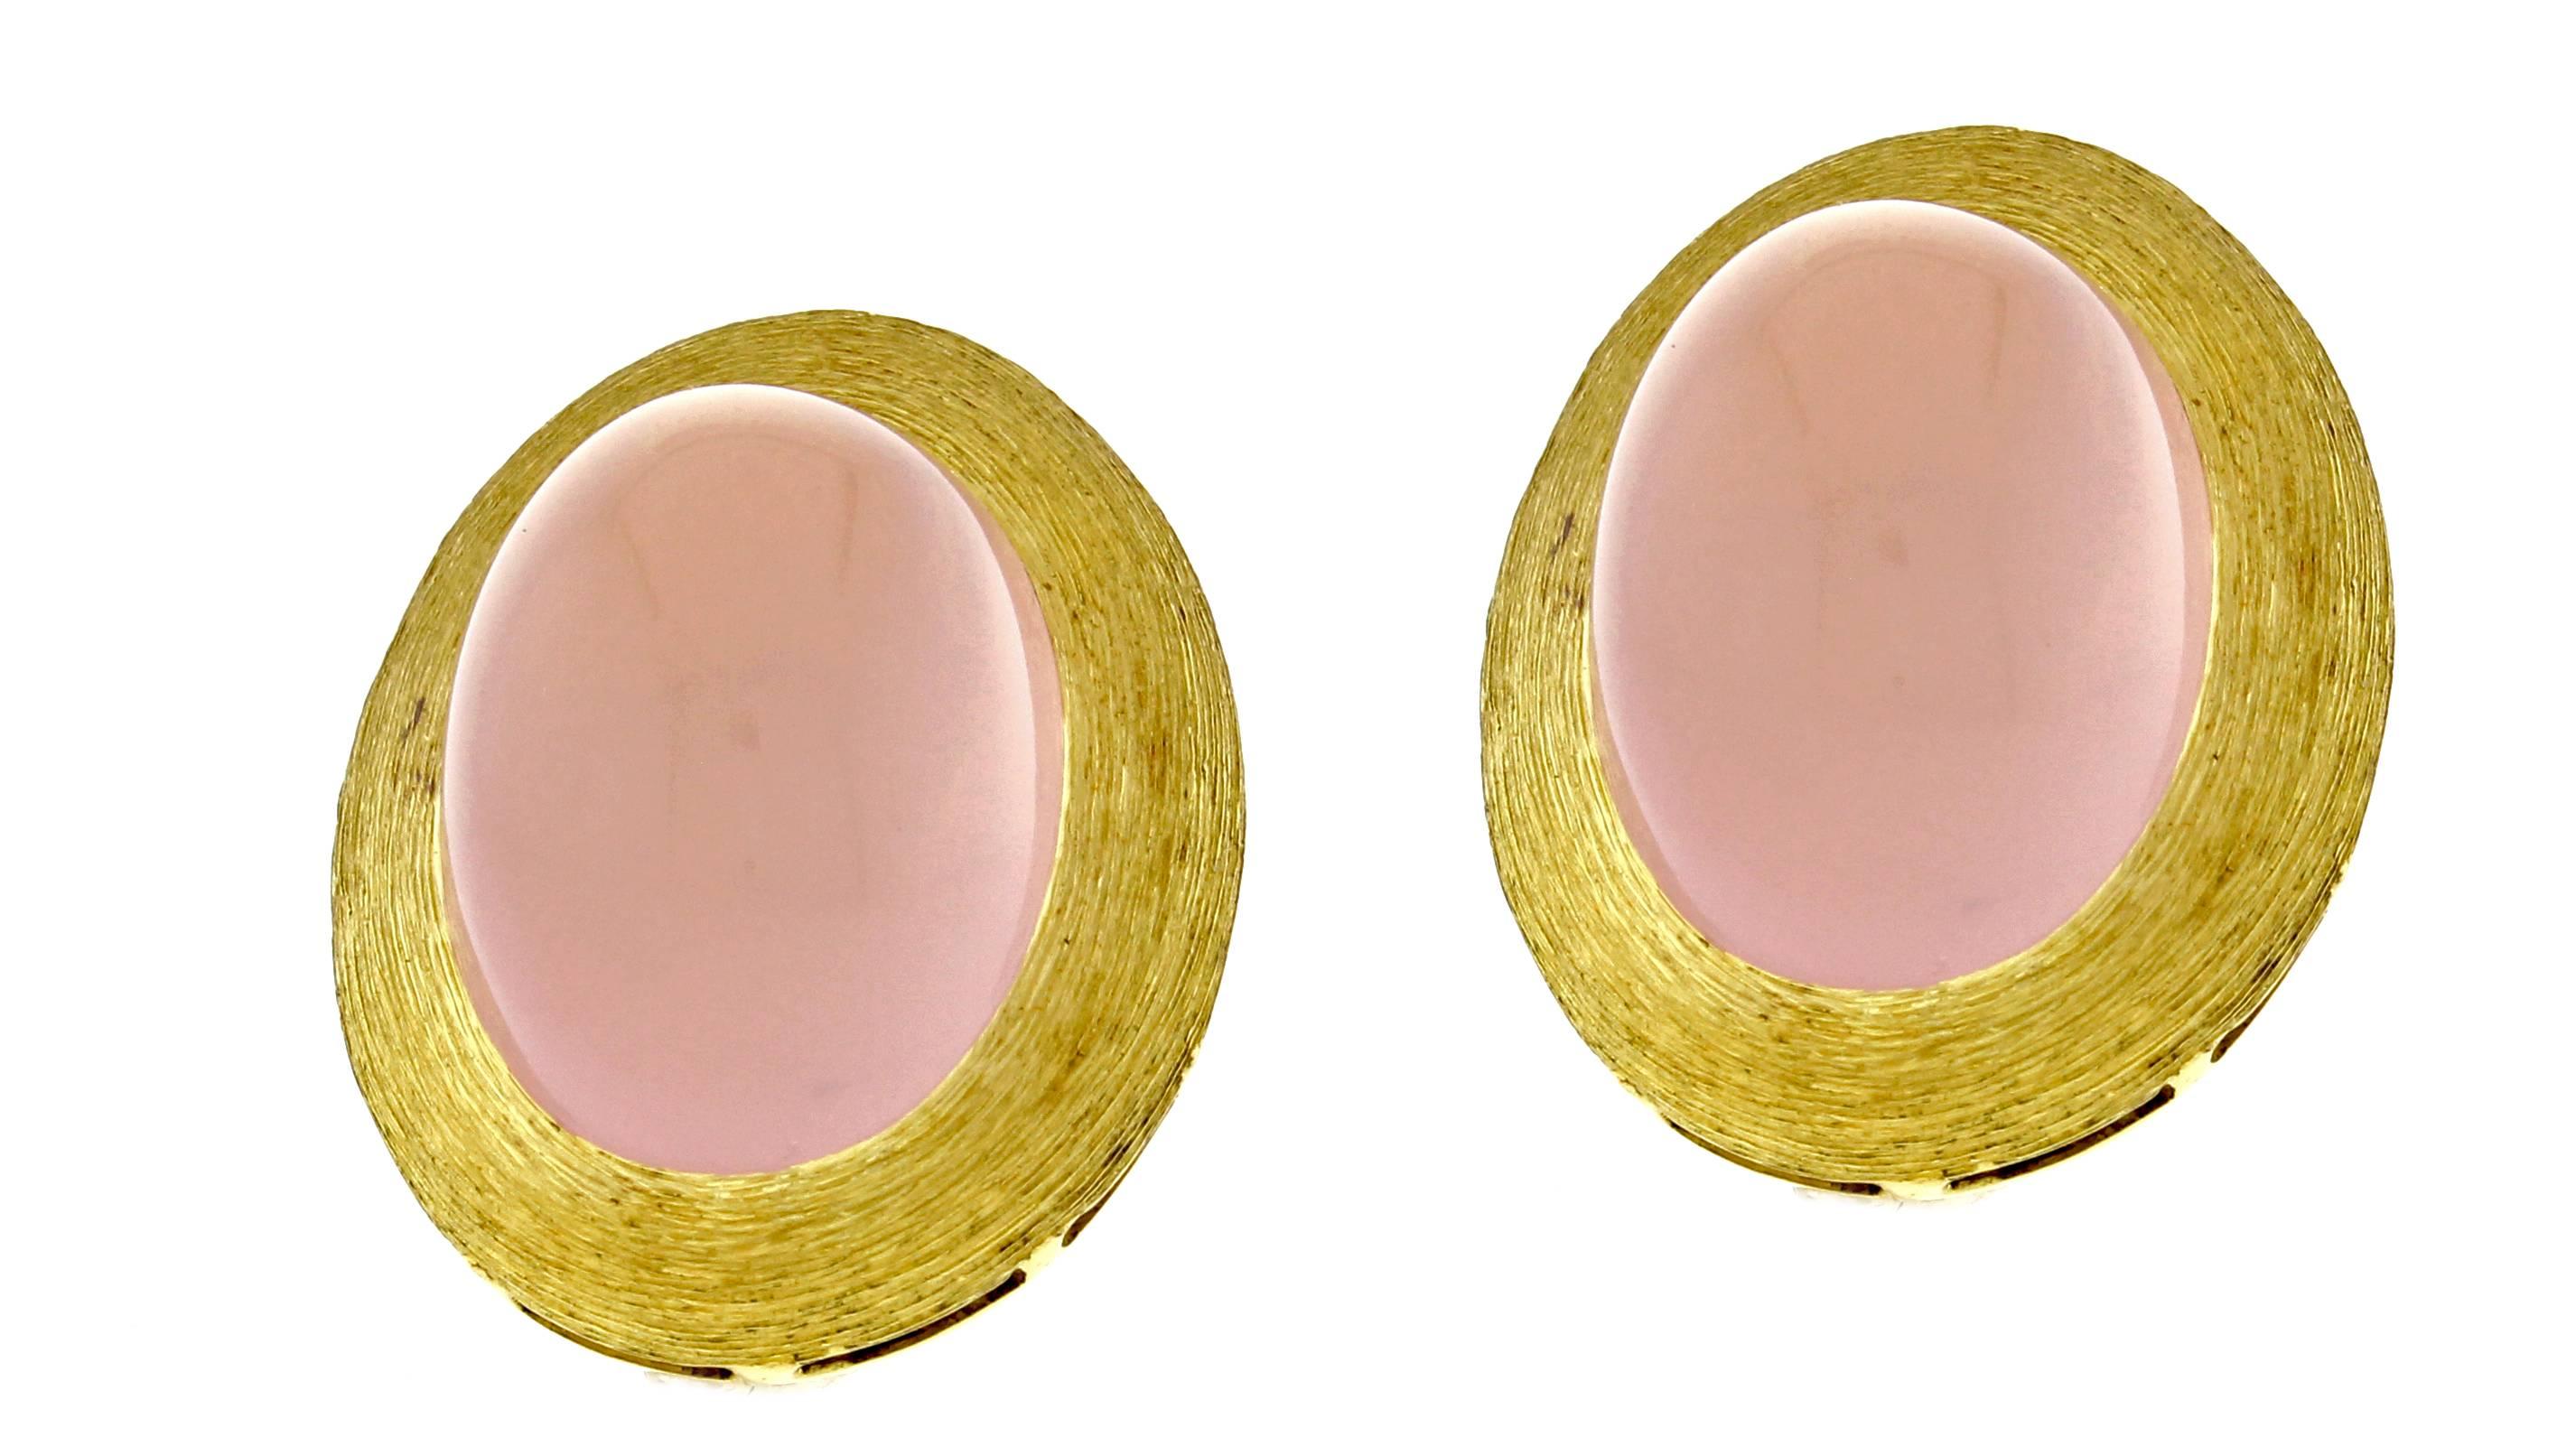 From acclaimed designer Henry Dunay a pair rose quartz earrings. The earring feature a 18*12mm cabochon rose quartz set in an 18 karat gold frame with Dunay's distinctive Saba finish. The earrings measure 25*18mm 